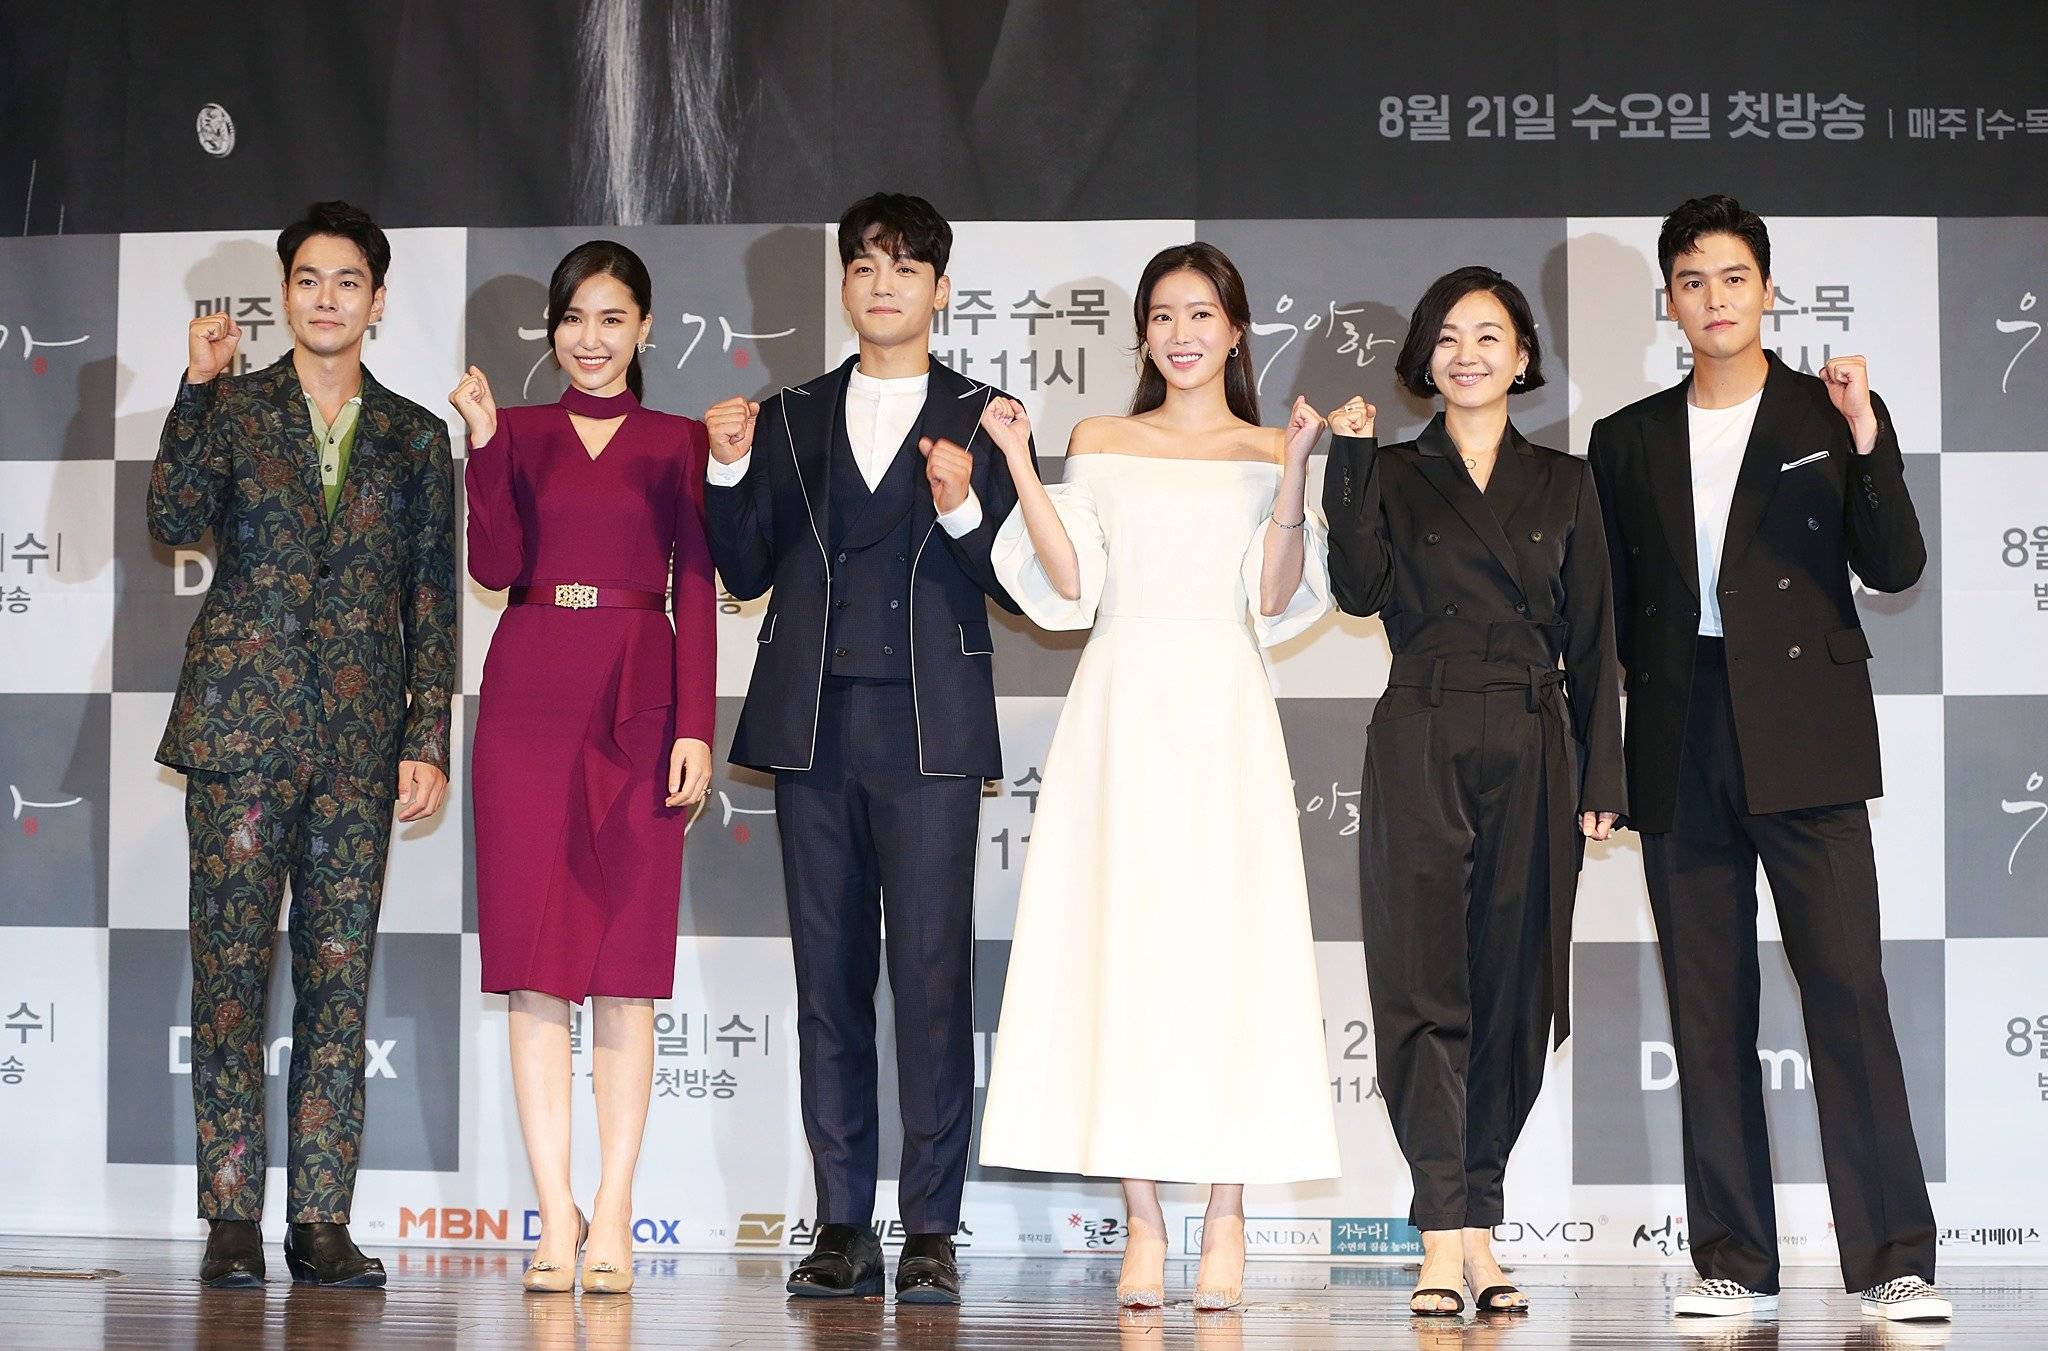 Photos] Press Conference Photos Added for the Upcoming Korean Drama  'Graceful Family' @ HanCinema